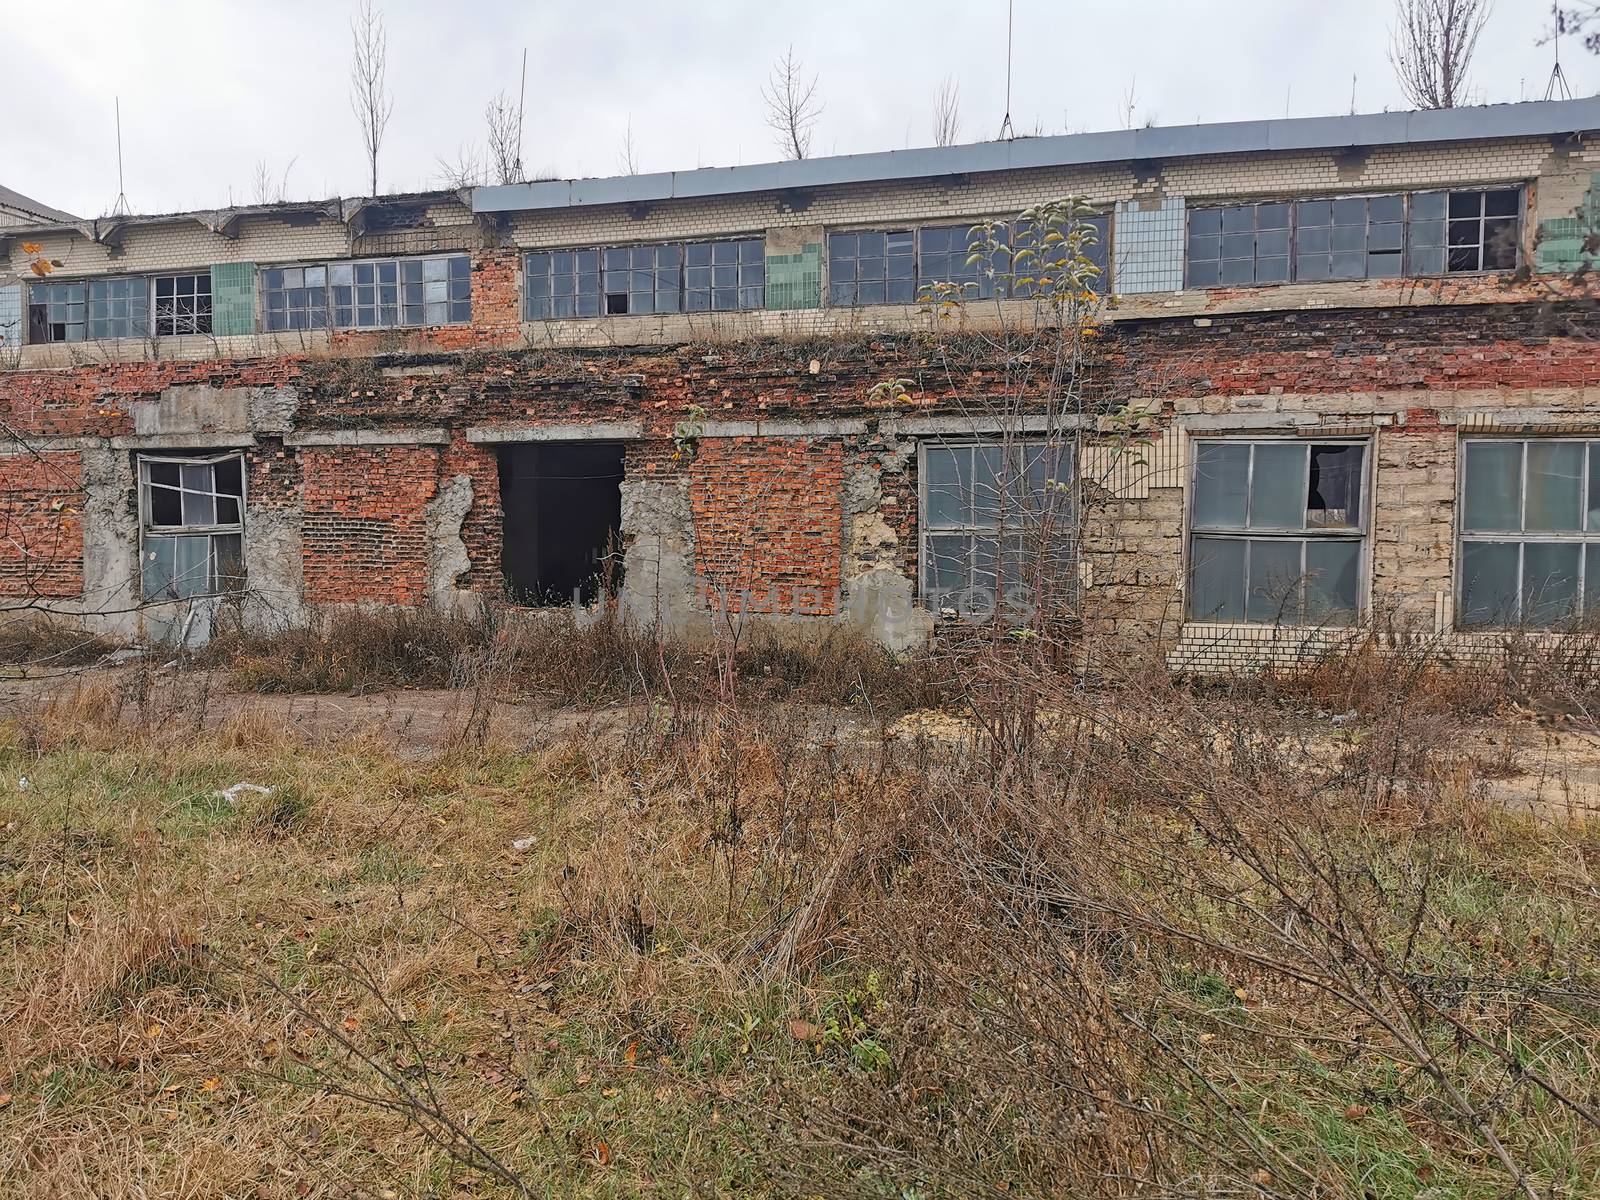 Abandoned old and dirty factory ruin, outside building view